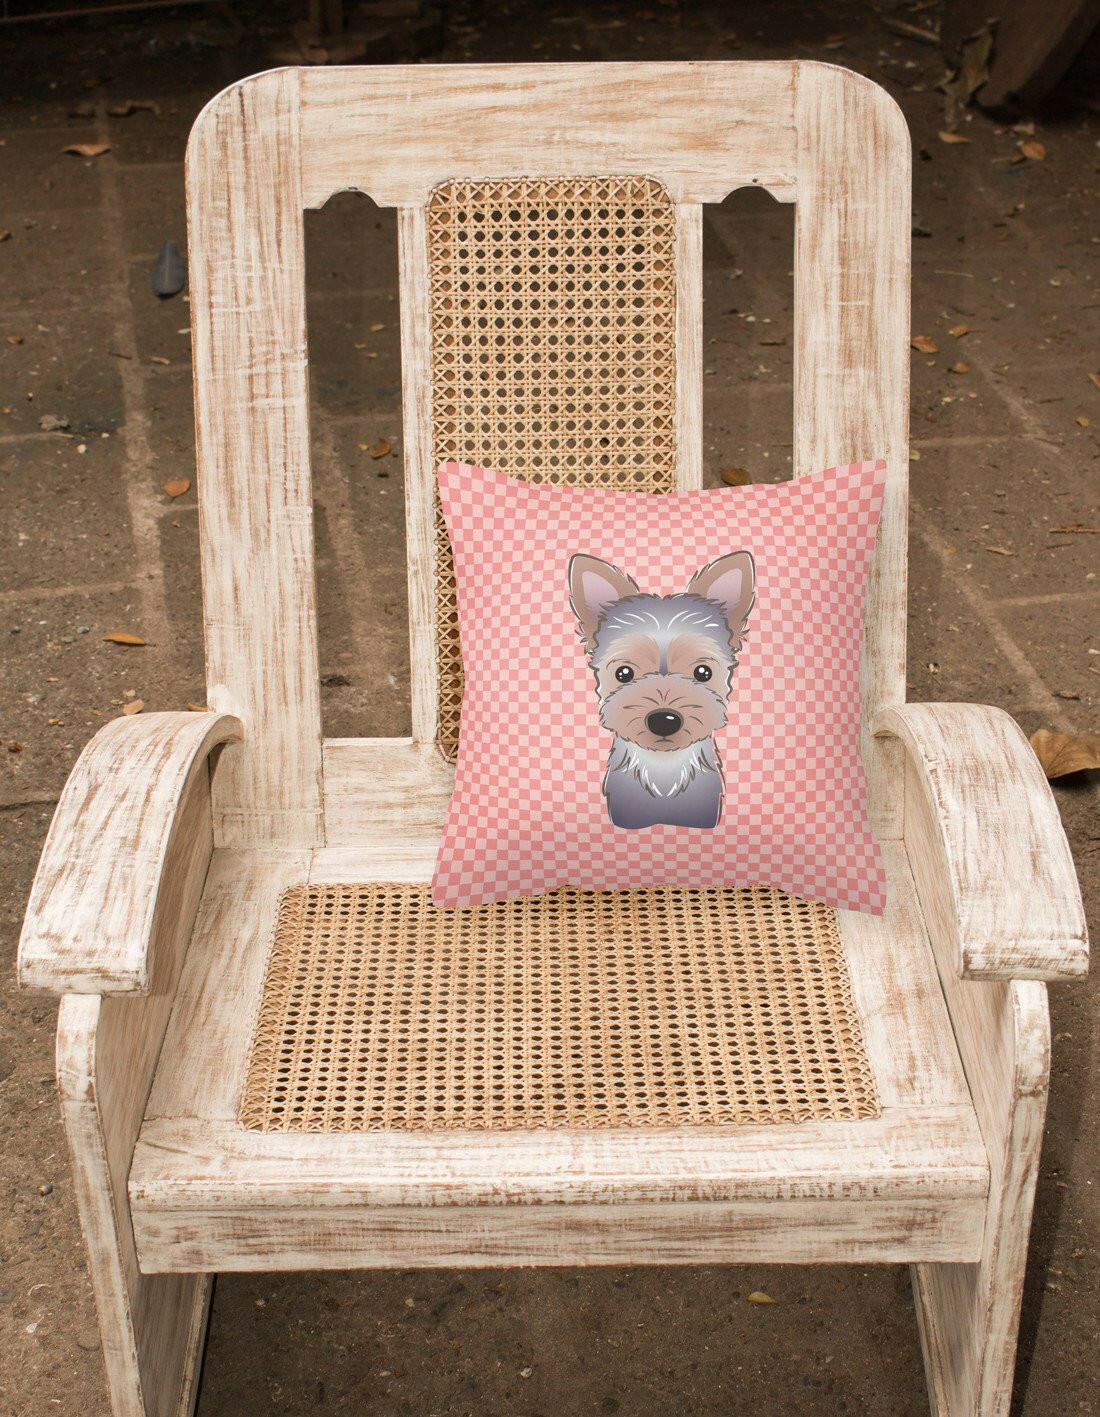 Checkerboard Pink Yorkie Puppy Canvas Fabric Decorative Pillow BB1232PW1414 - the-store.com